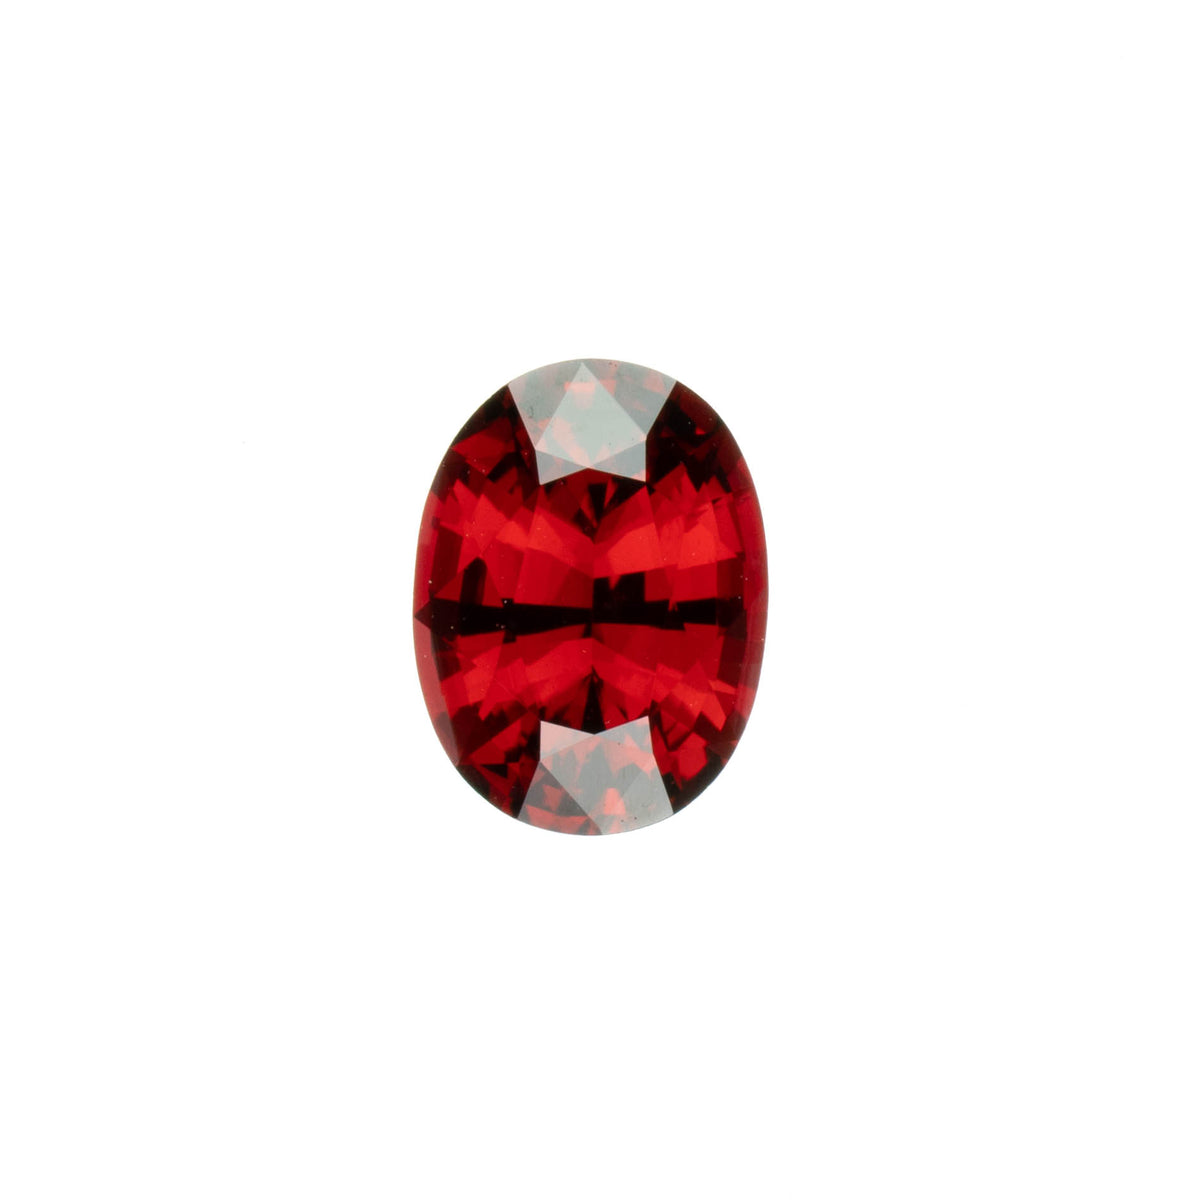 0.61ct Natural Vivid Red Spinel